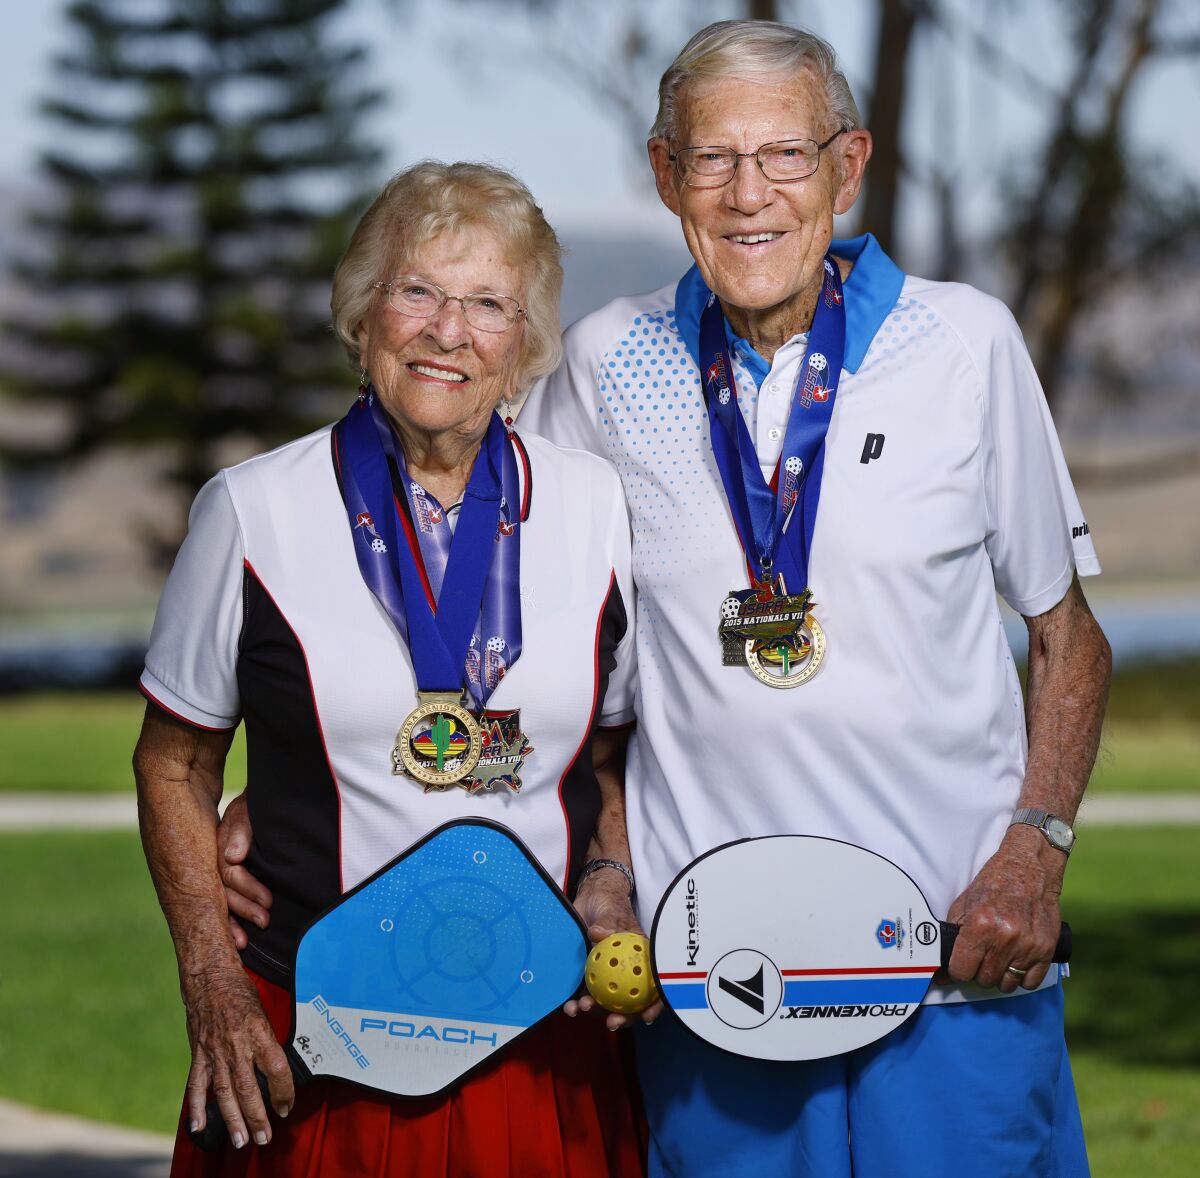 A couple wearing pickleball uniforms wearing medals and holding paddles.